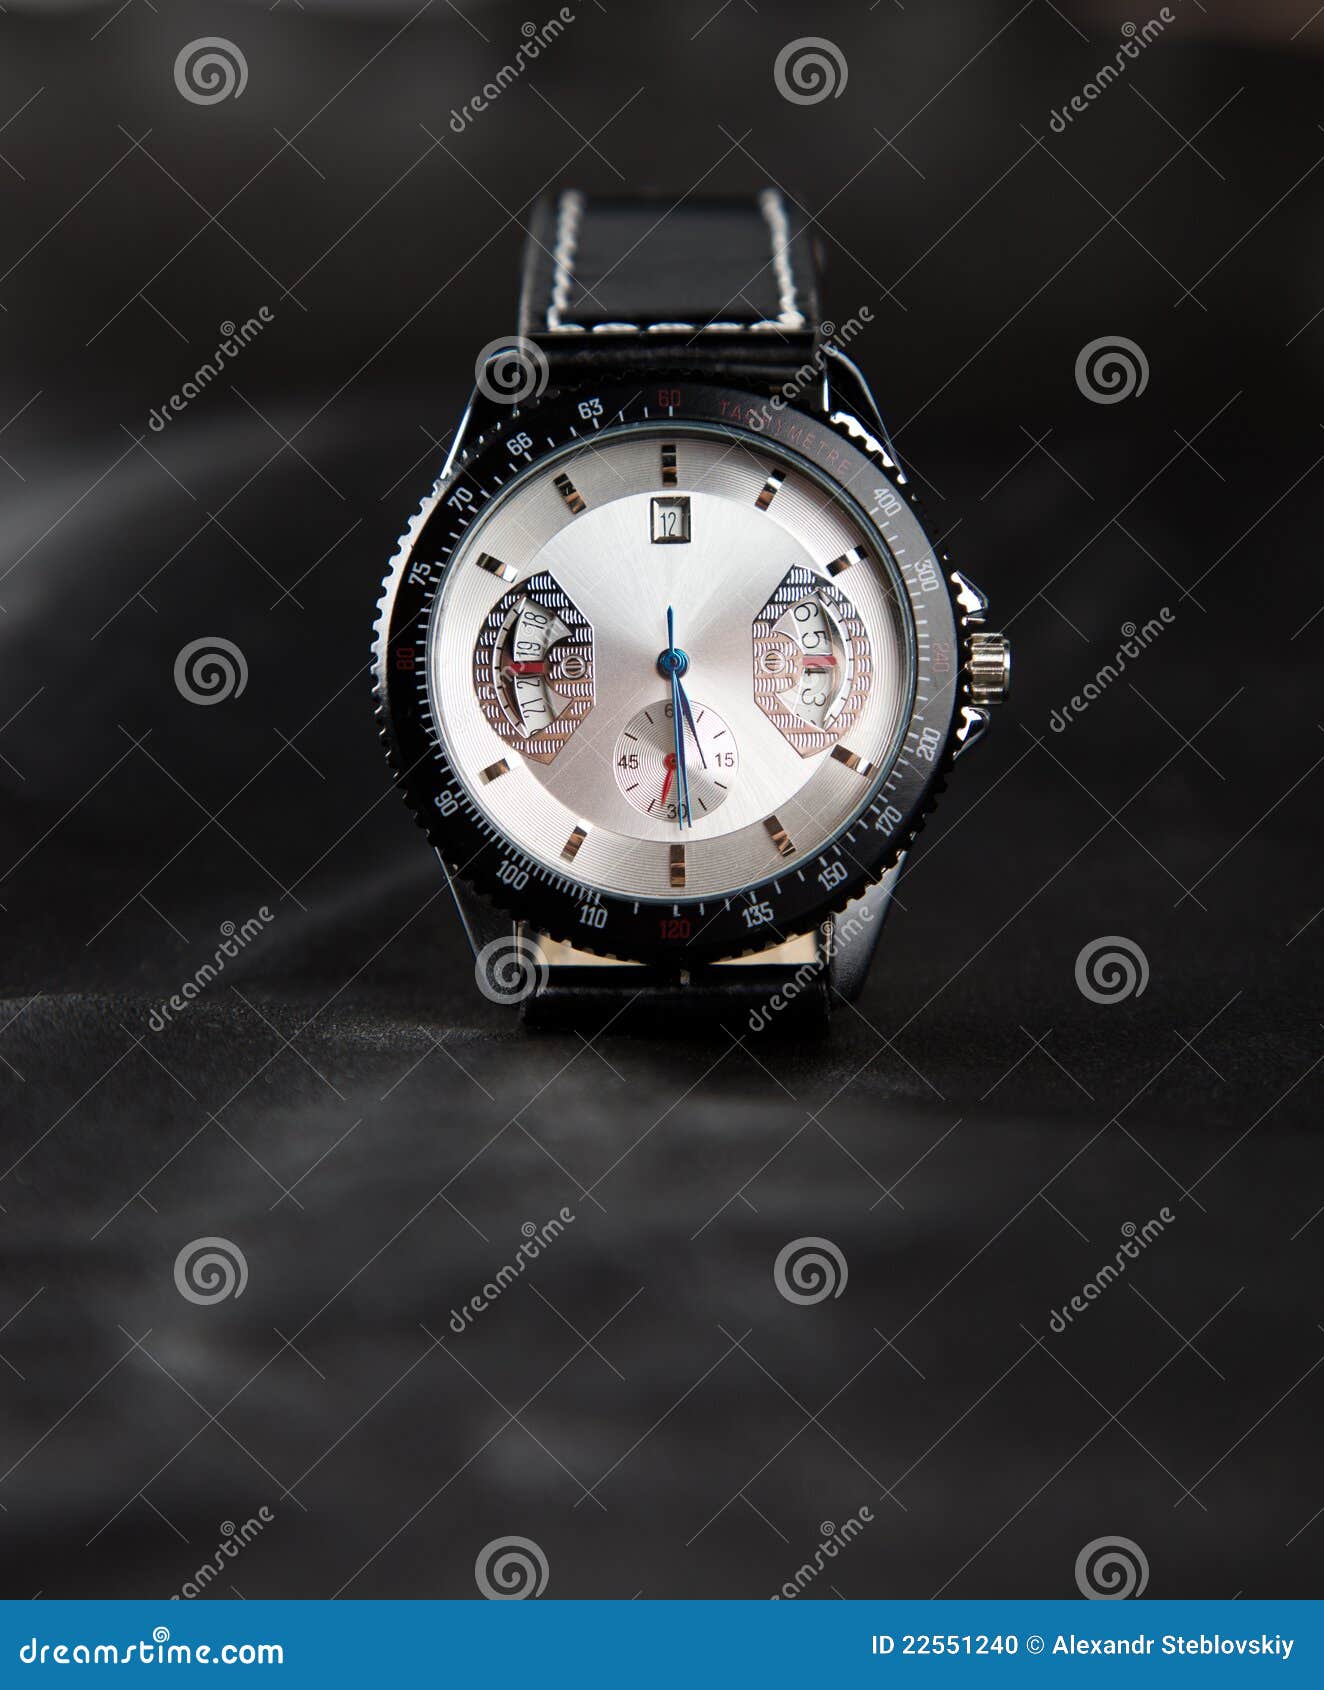 Sport watches stock photo. Image of meeting, calendar - 22551240